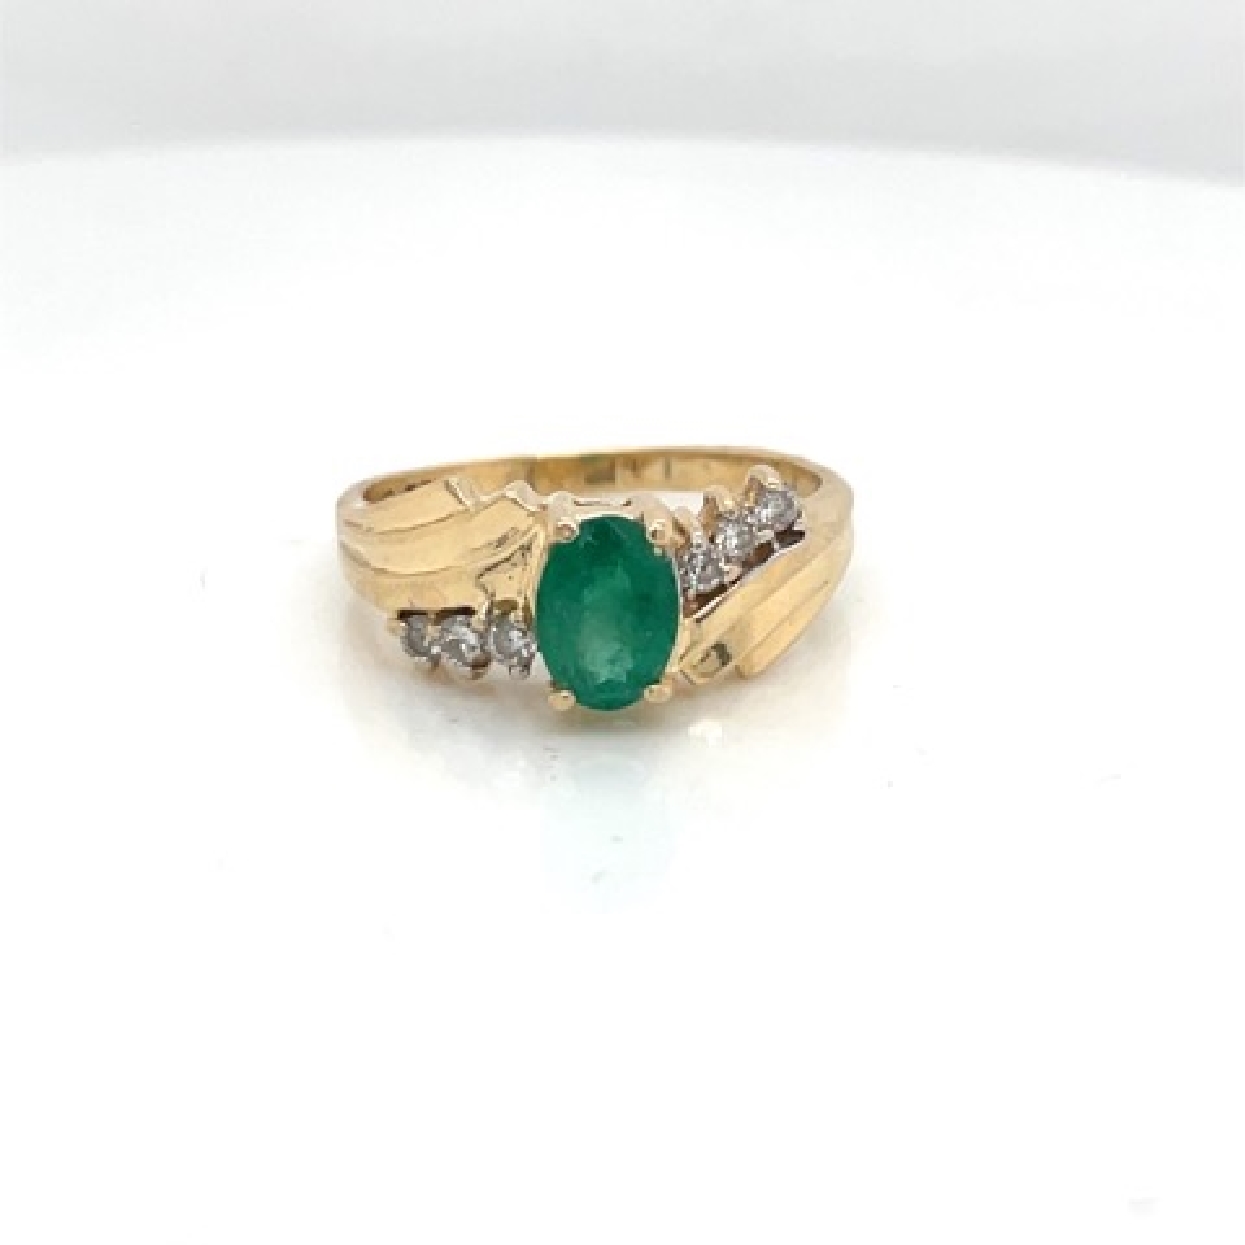 14K Yellow Gold Emerald Ring with Diamond Accents

Size 7.5